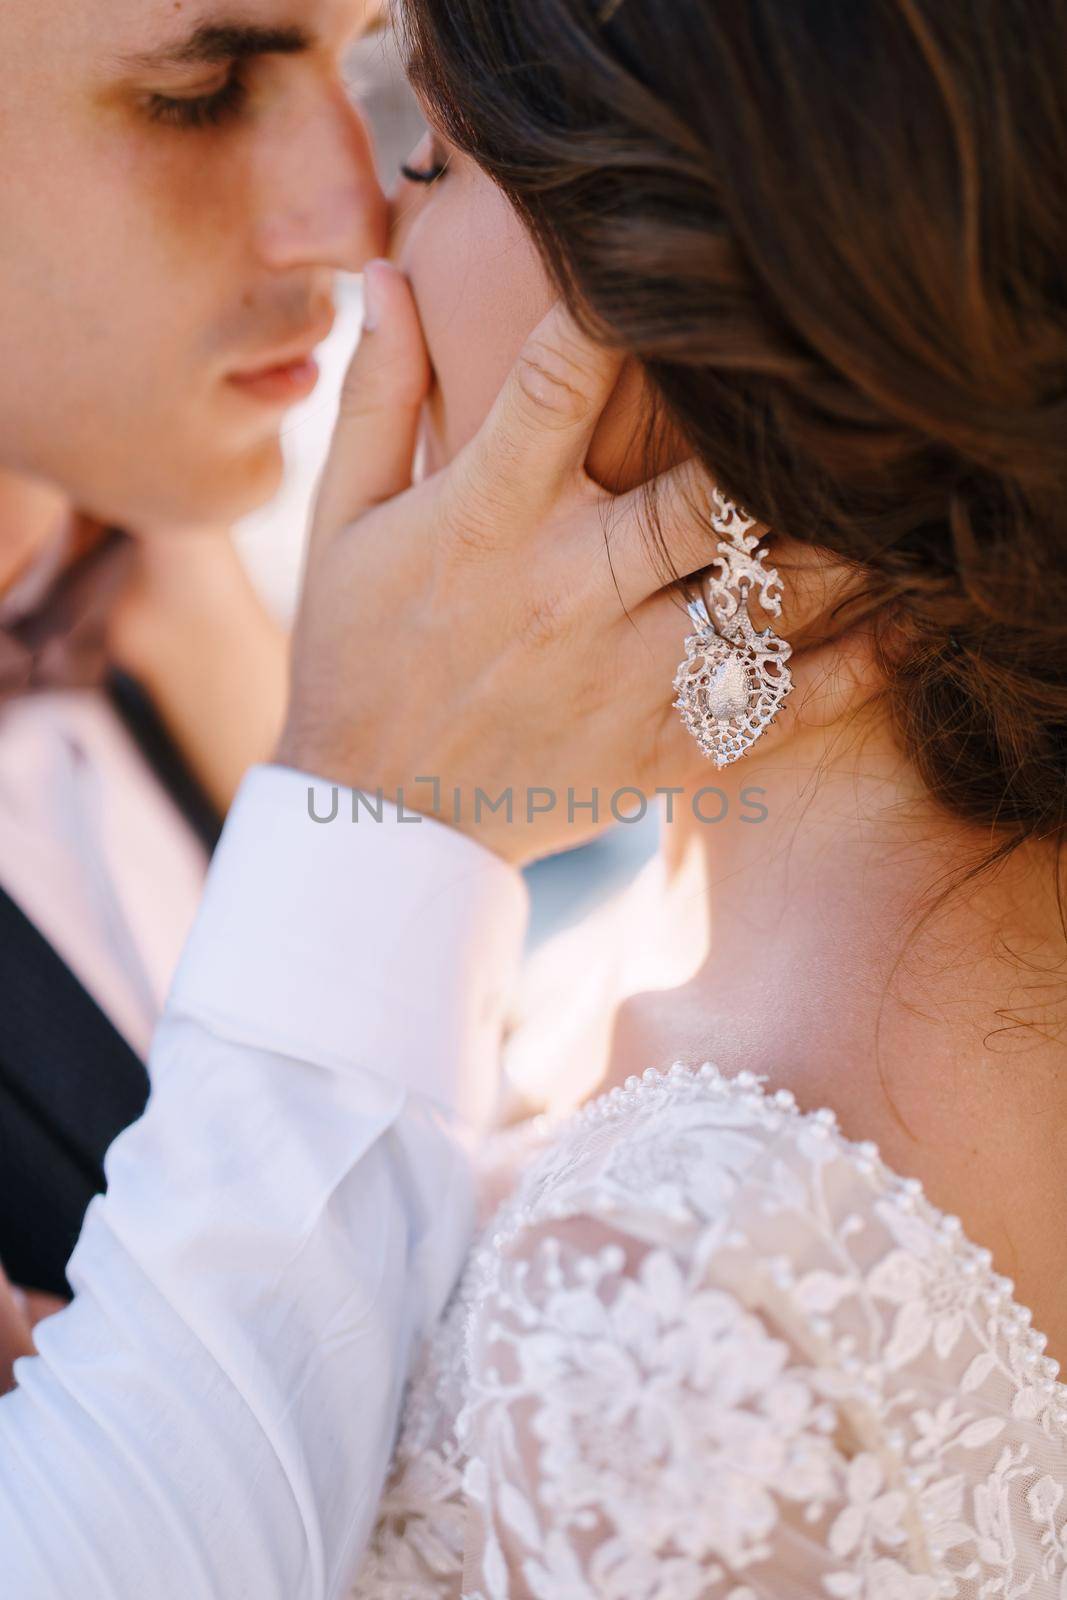 Close-up, the wedding couple is almost kissing. The groom strokes the bride's hand on the cheek. Fine-art wedding photo in Montenegro, Perast. by Nadtochiy